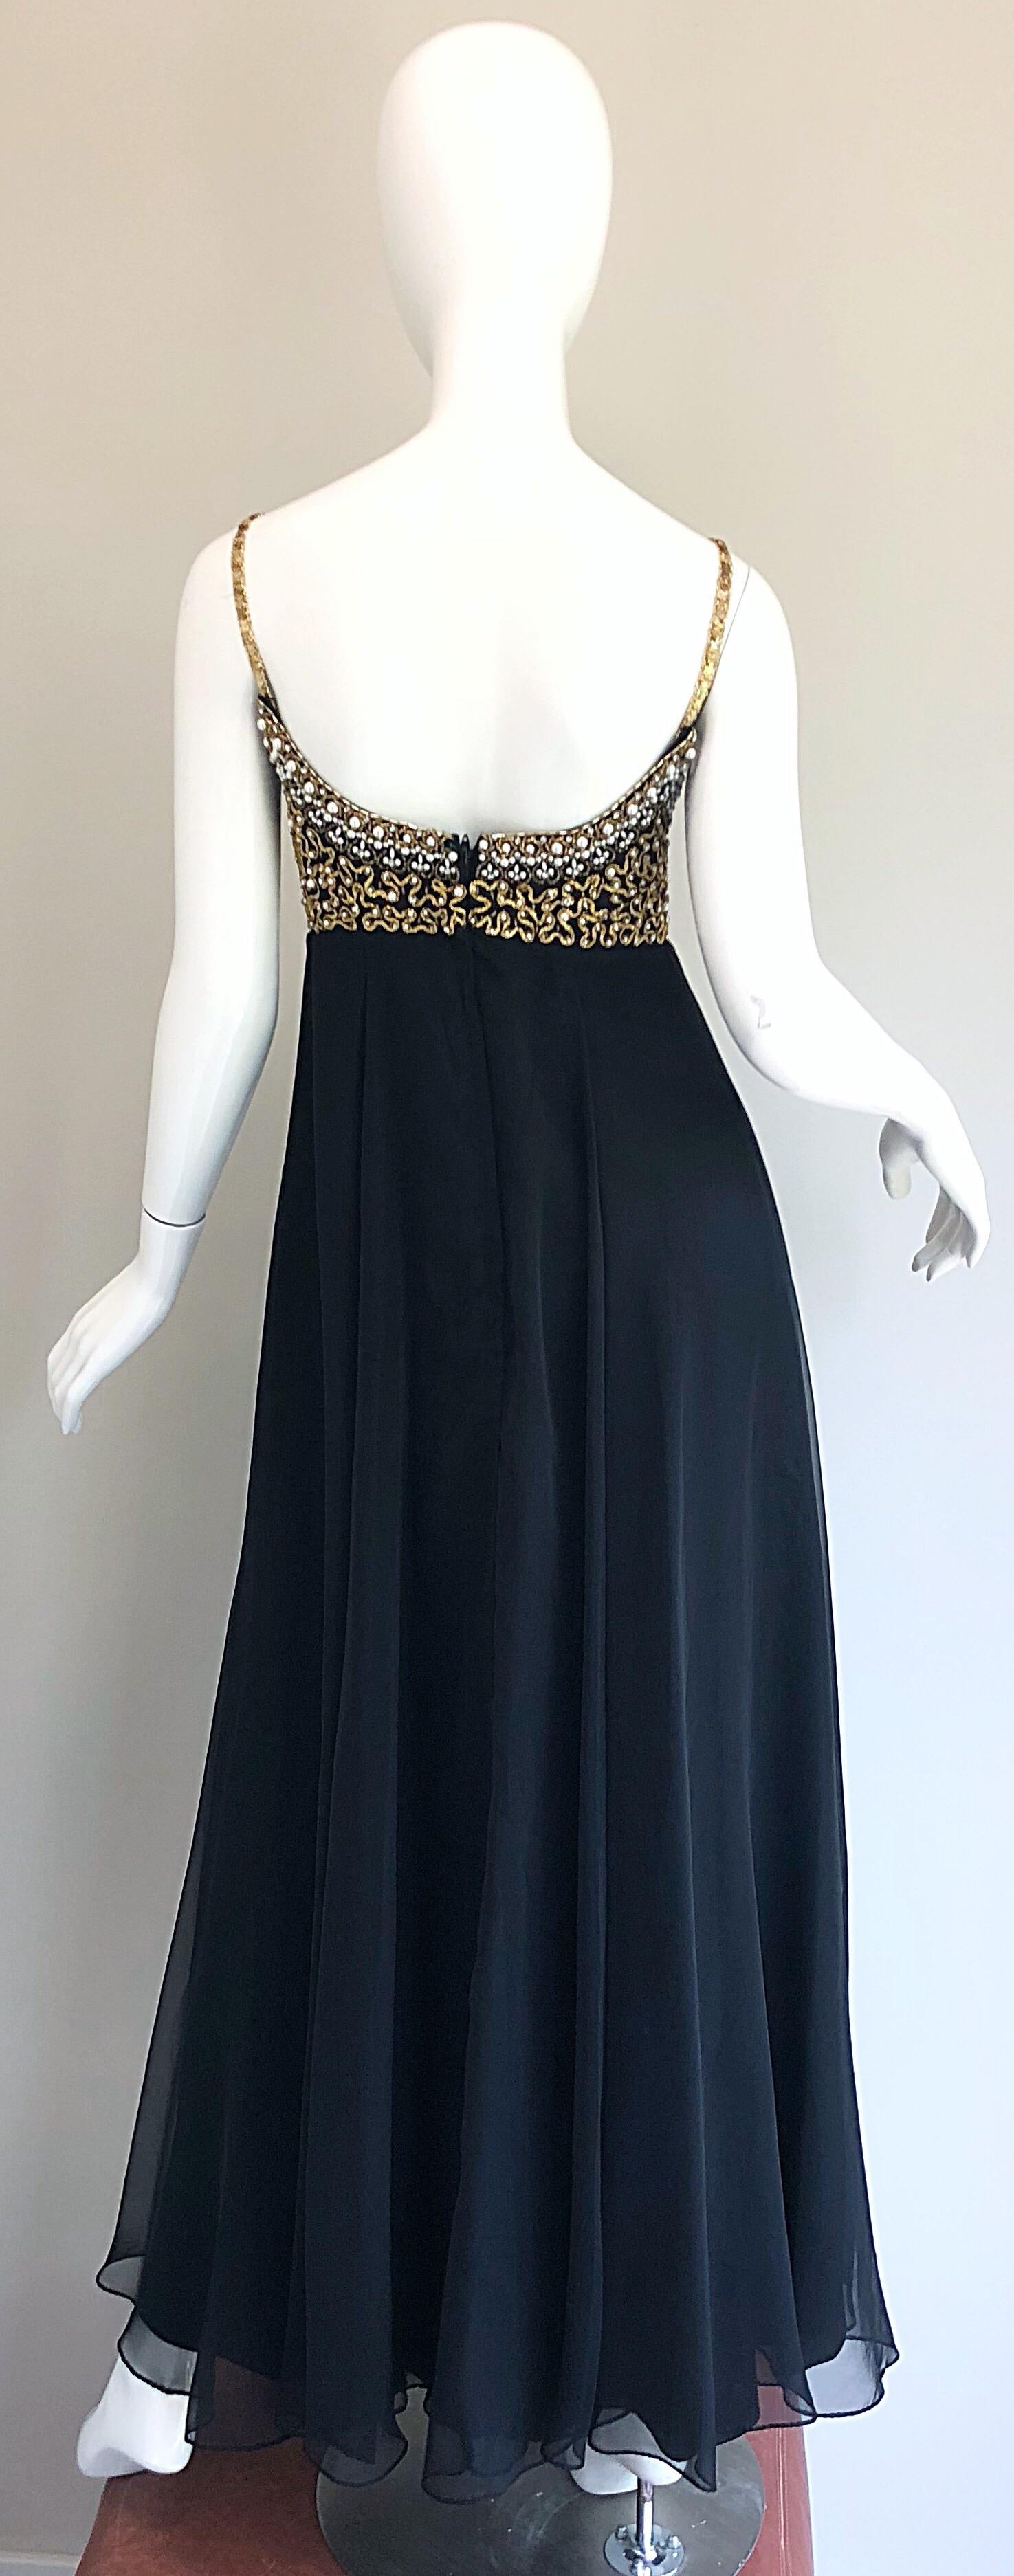 1970s Black + Gold Pearl + Rhinestone Encrusted Vintage 70s Chiffon Evening Gown In Excellent Condition For Sale In San Diego, CA